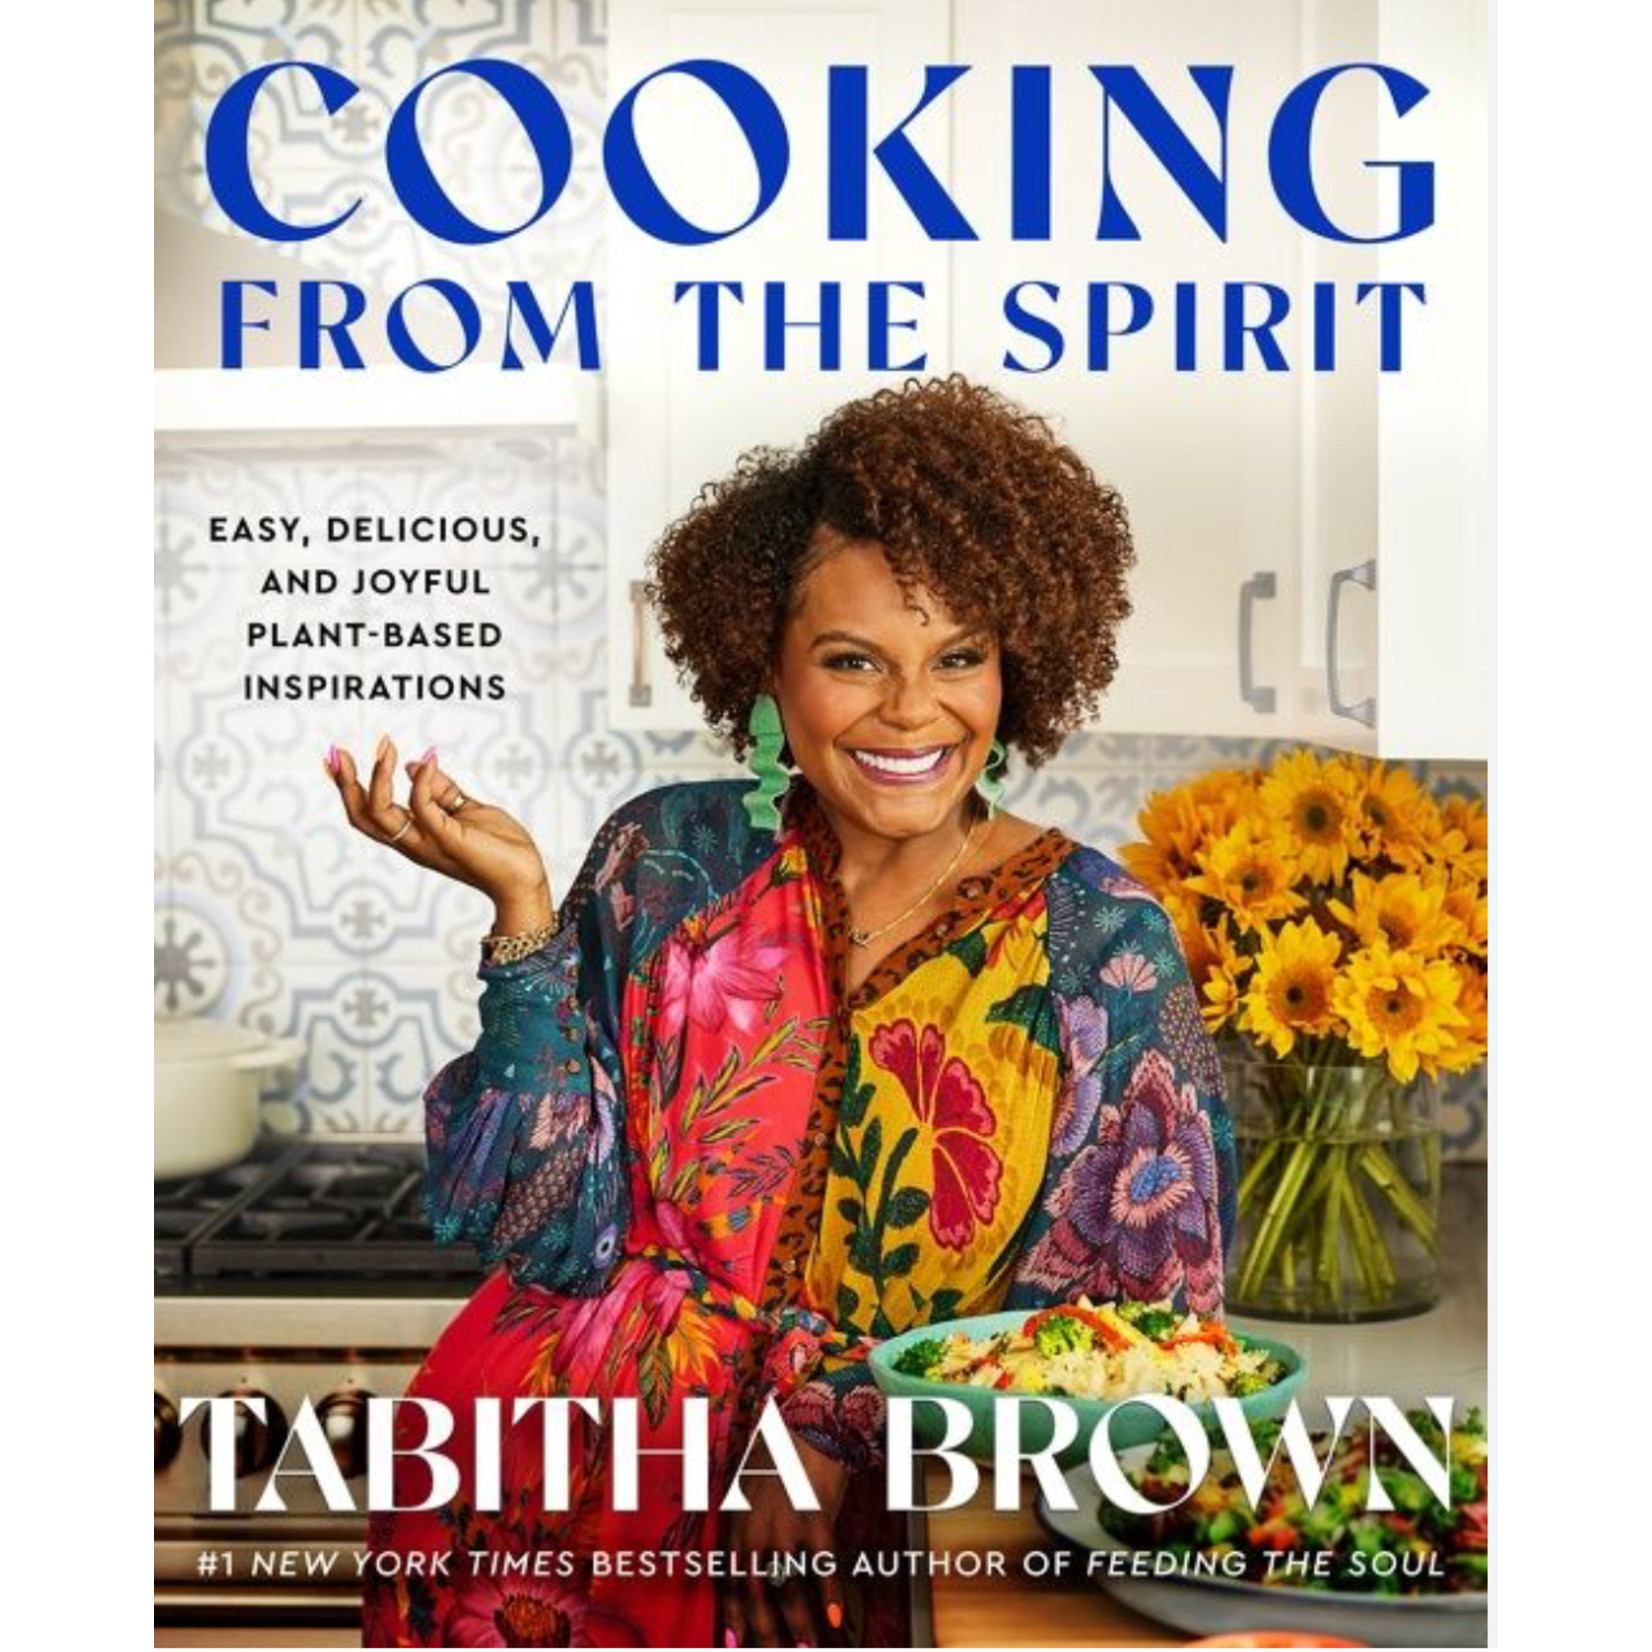 COOKING FROM THE SPIRIT